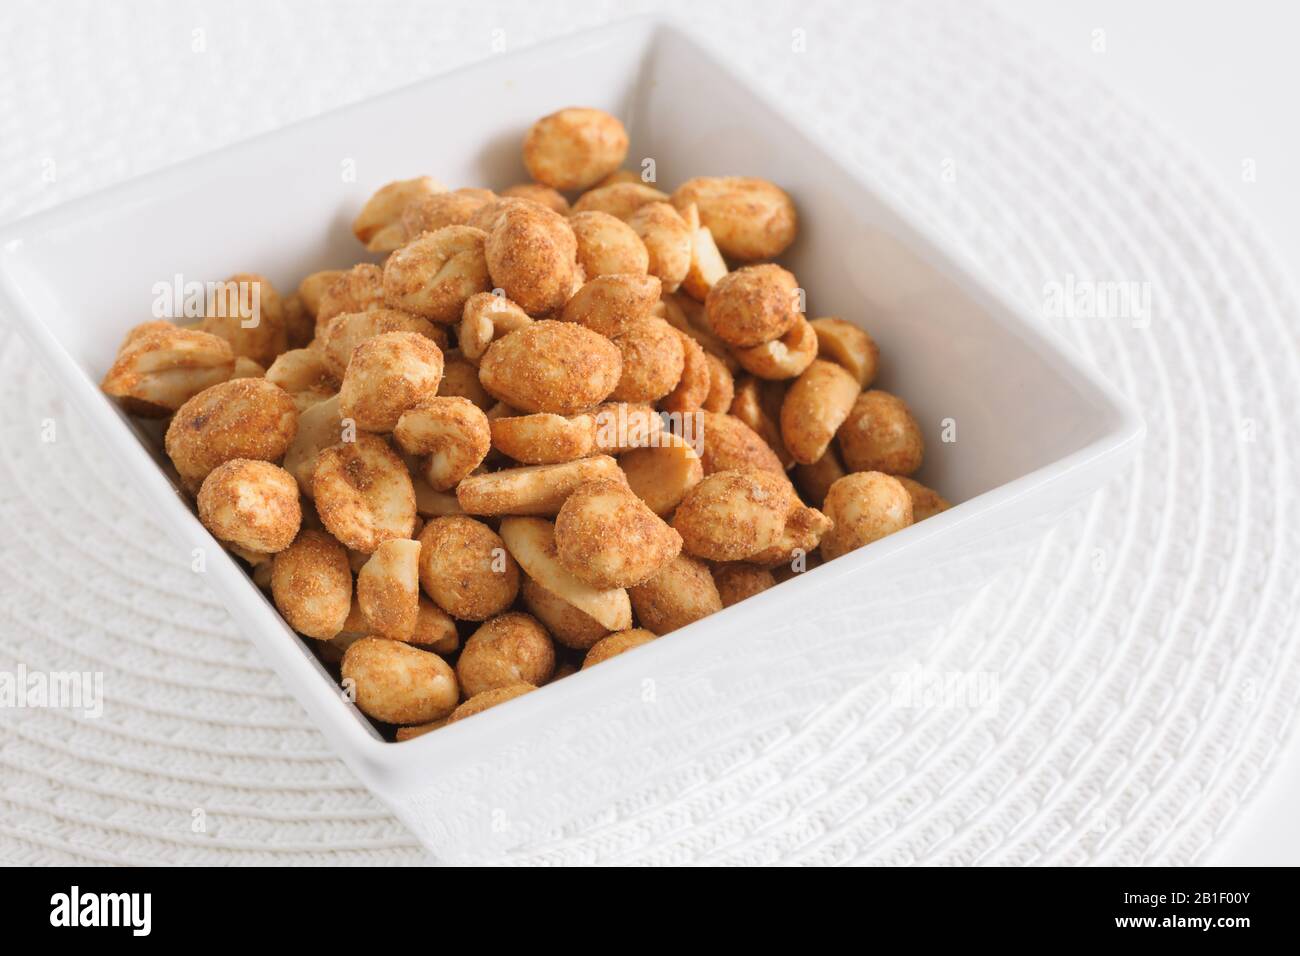 Dry or oven roasted peanuts lightly seasoned eaten as high protein snack Stock Photo